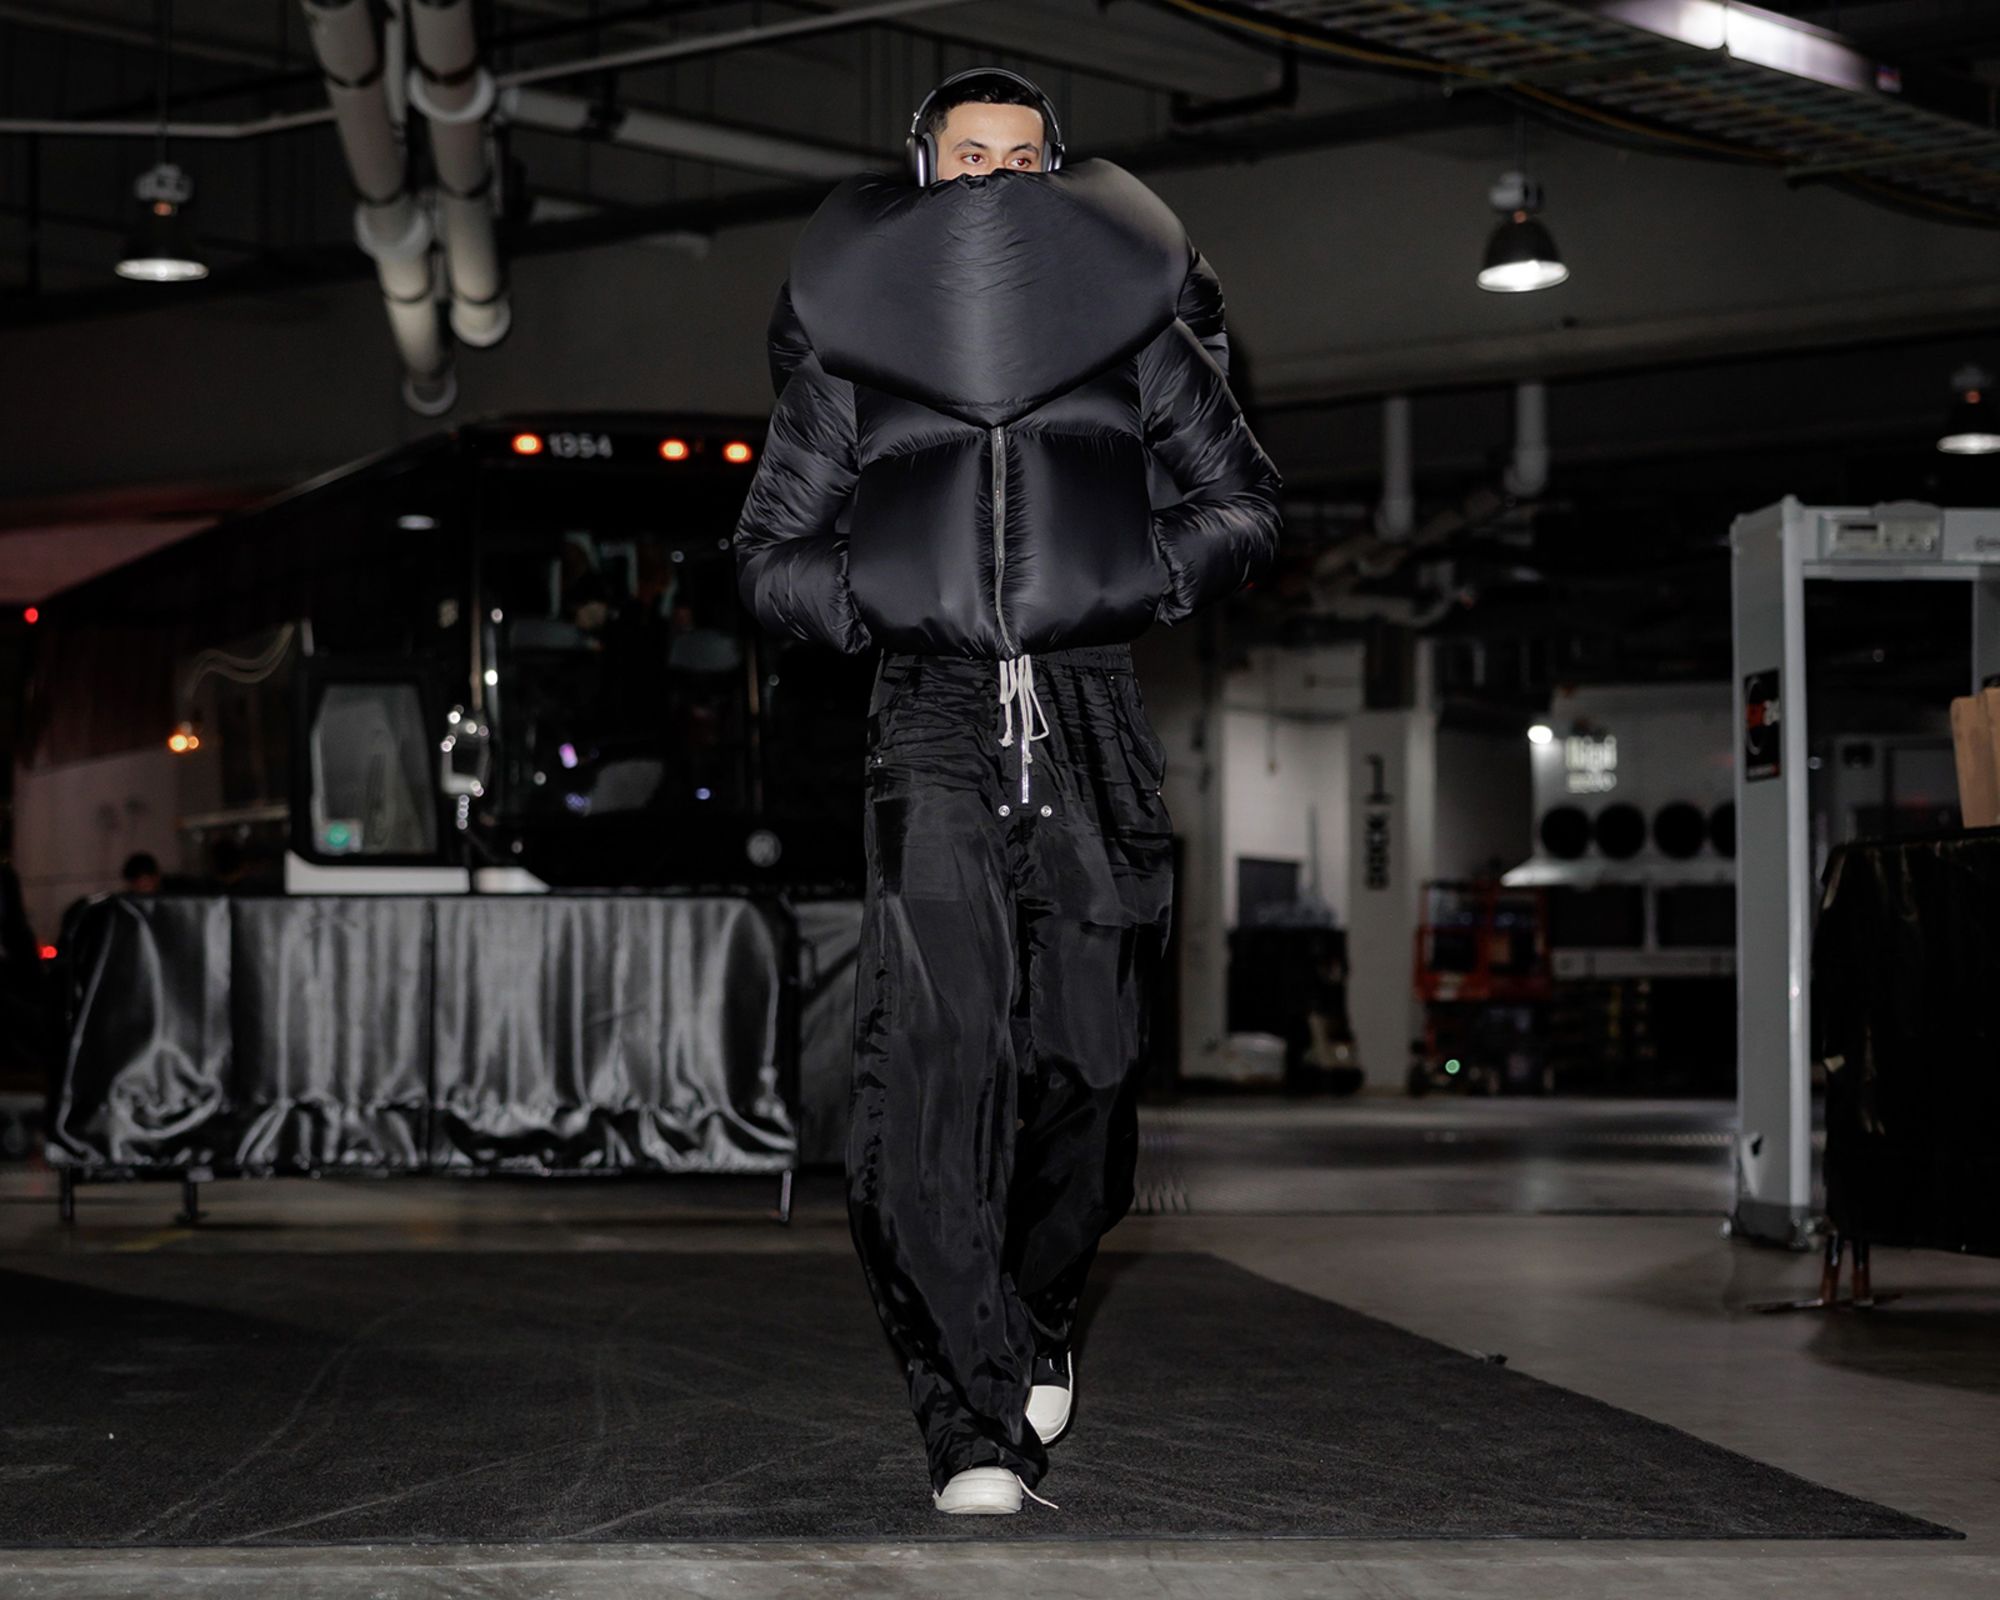 NBA players are using 'tunnel walks' to show off their personal style